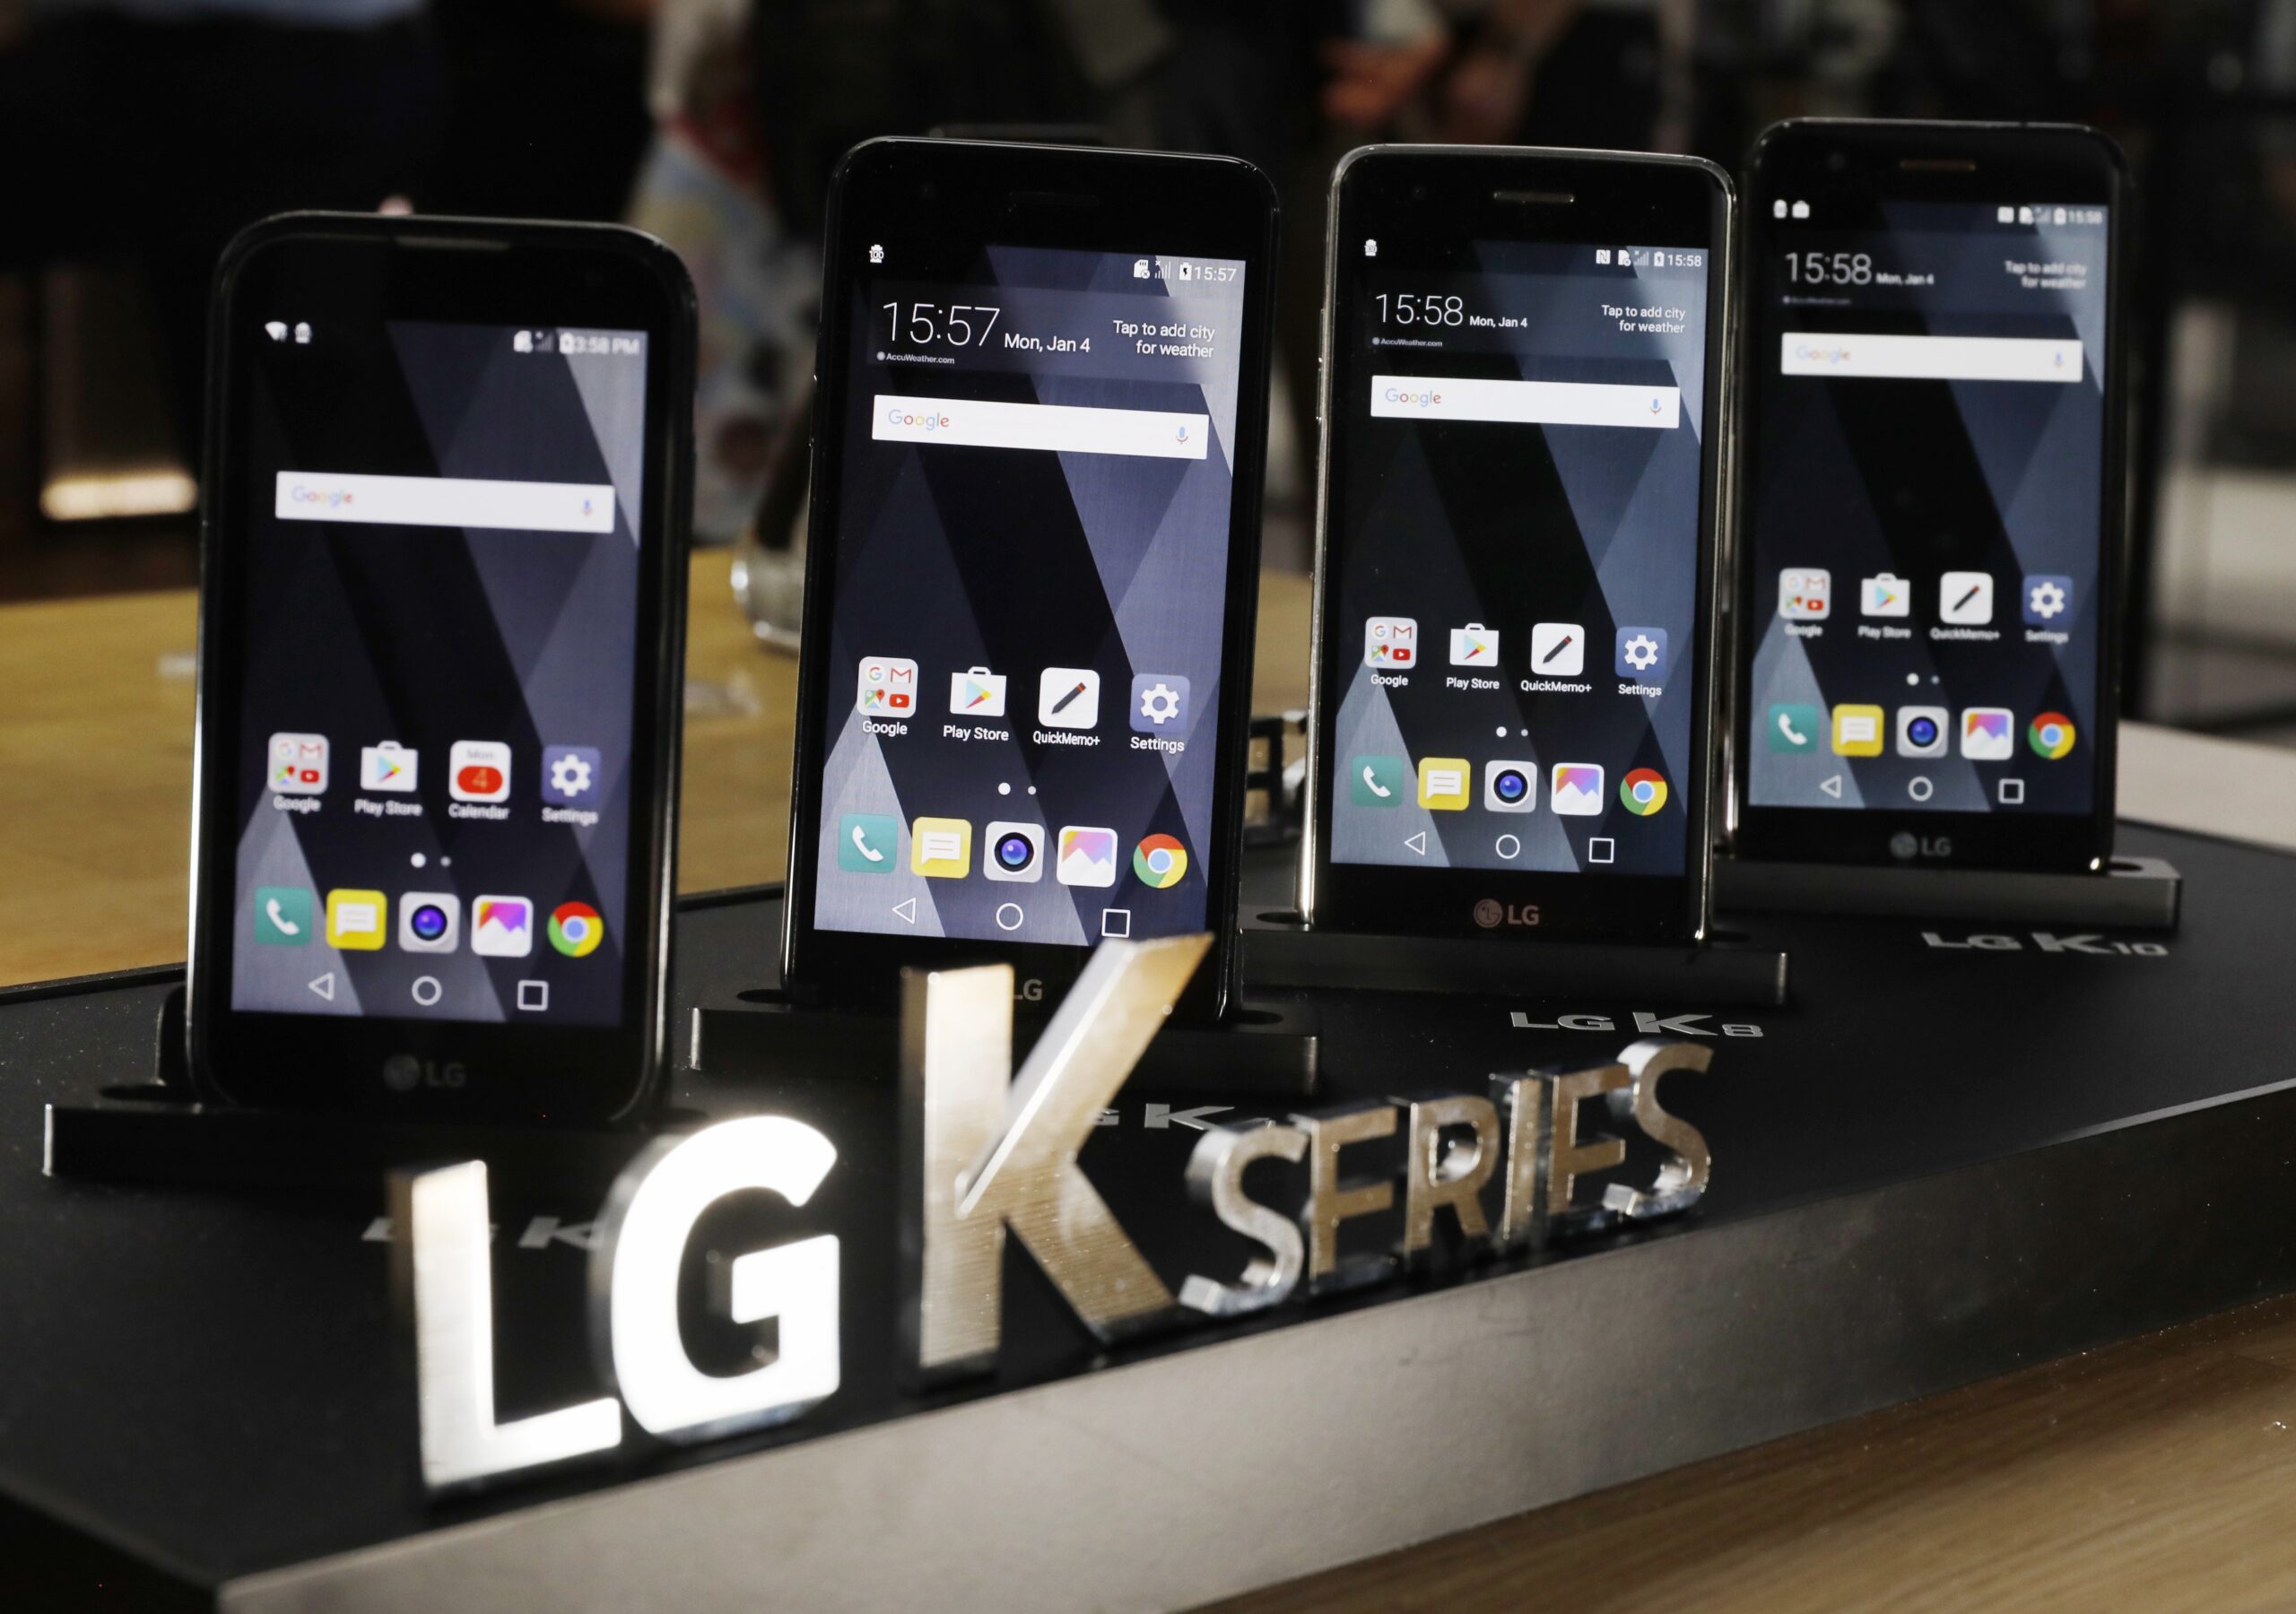 Close-up front view of the LG K Series smartphones including the K4, K7, K8 and K10 models on display at LG's CES 2017 booth